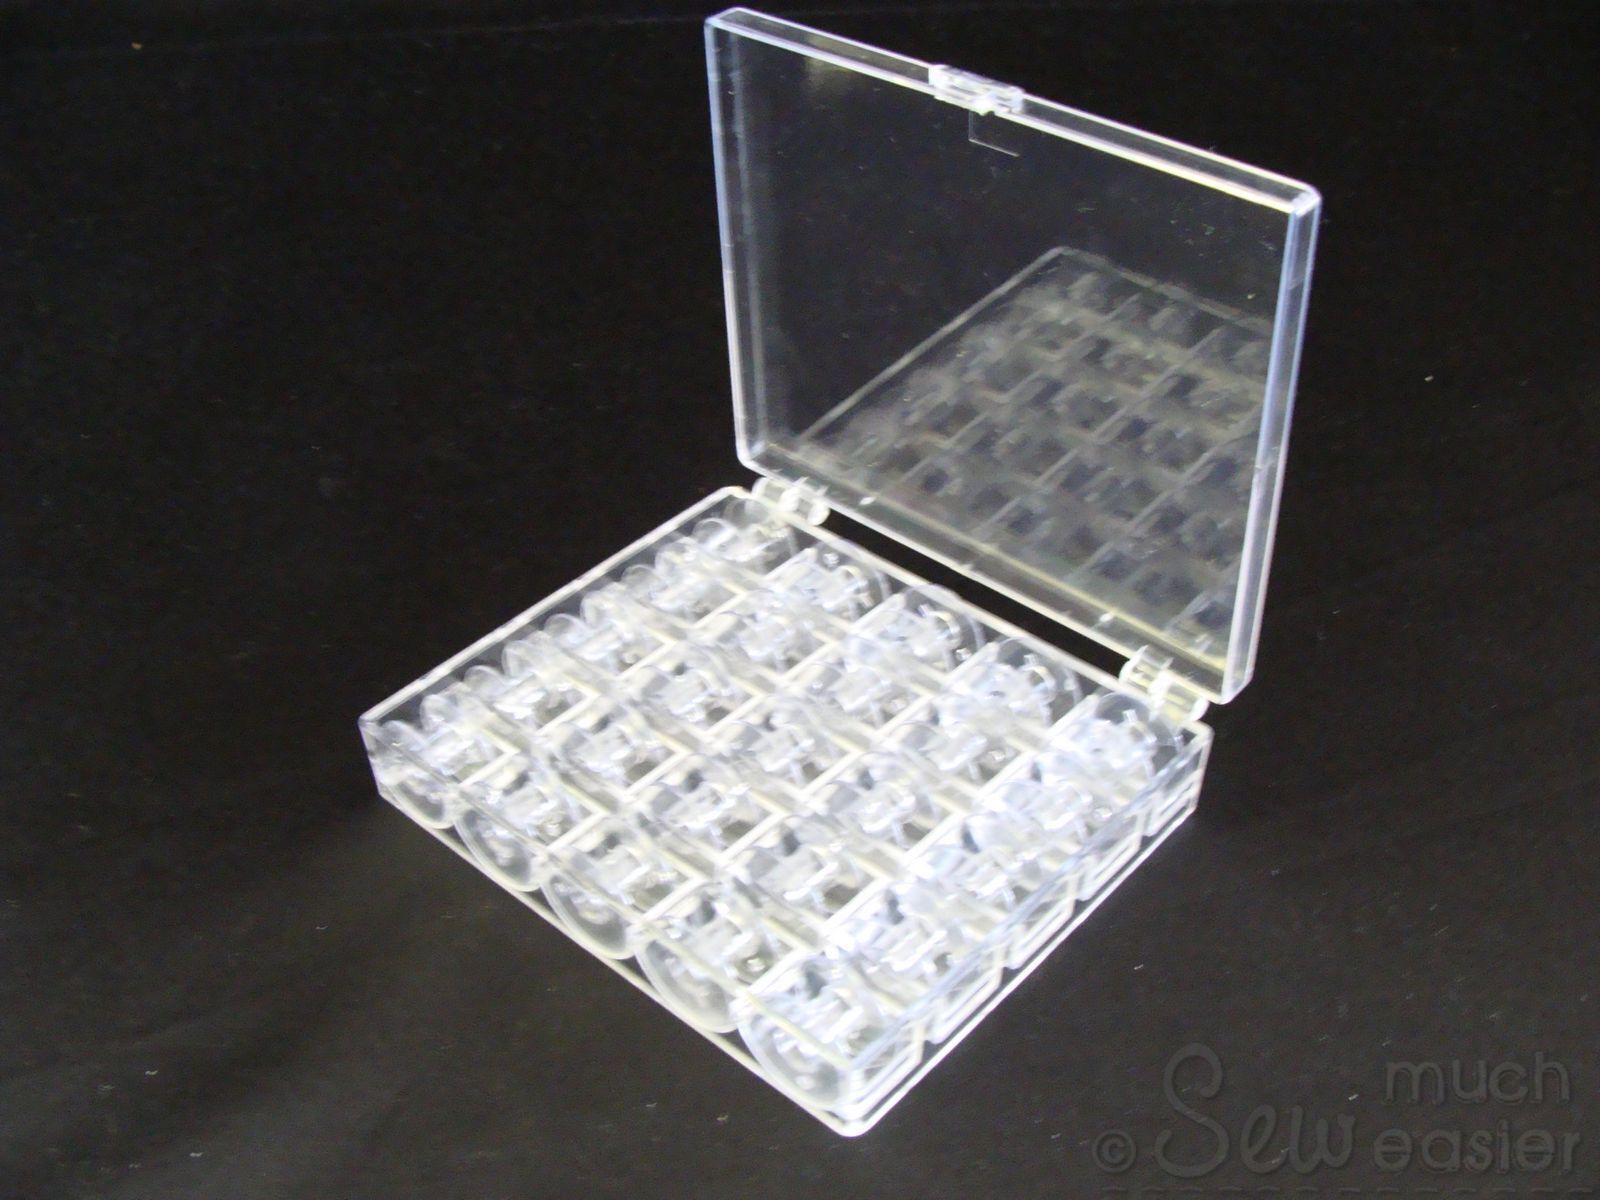 Hemline Clear Bobbin Storage Box With Lid - Holds 25 Sewing Machine Bobbins  - Simpson Advanced Chiropractic & Medical Center